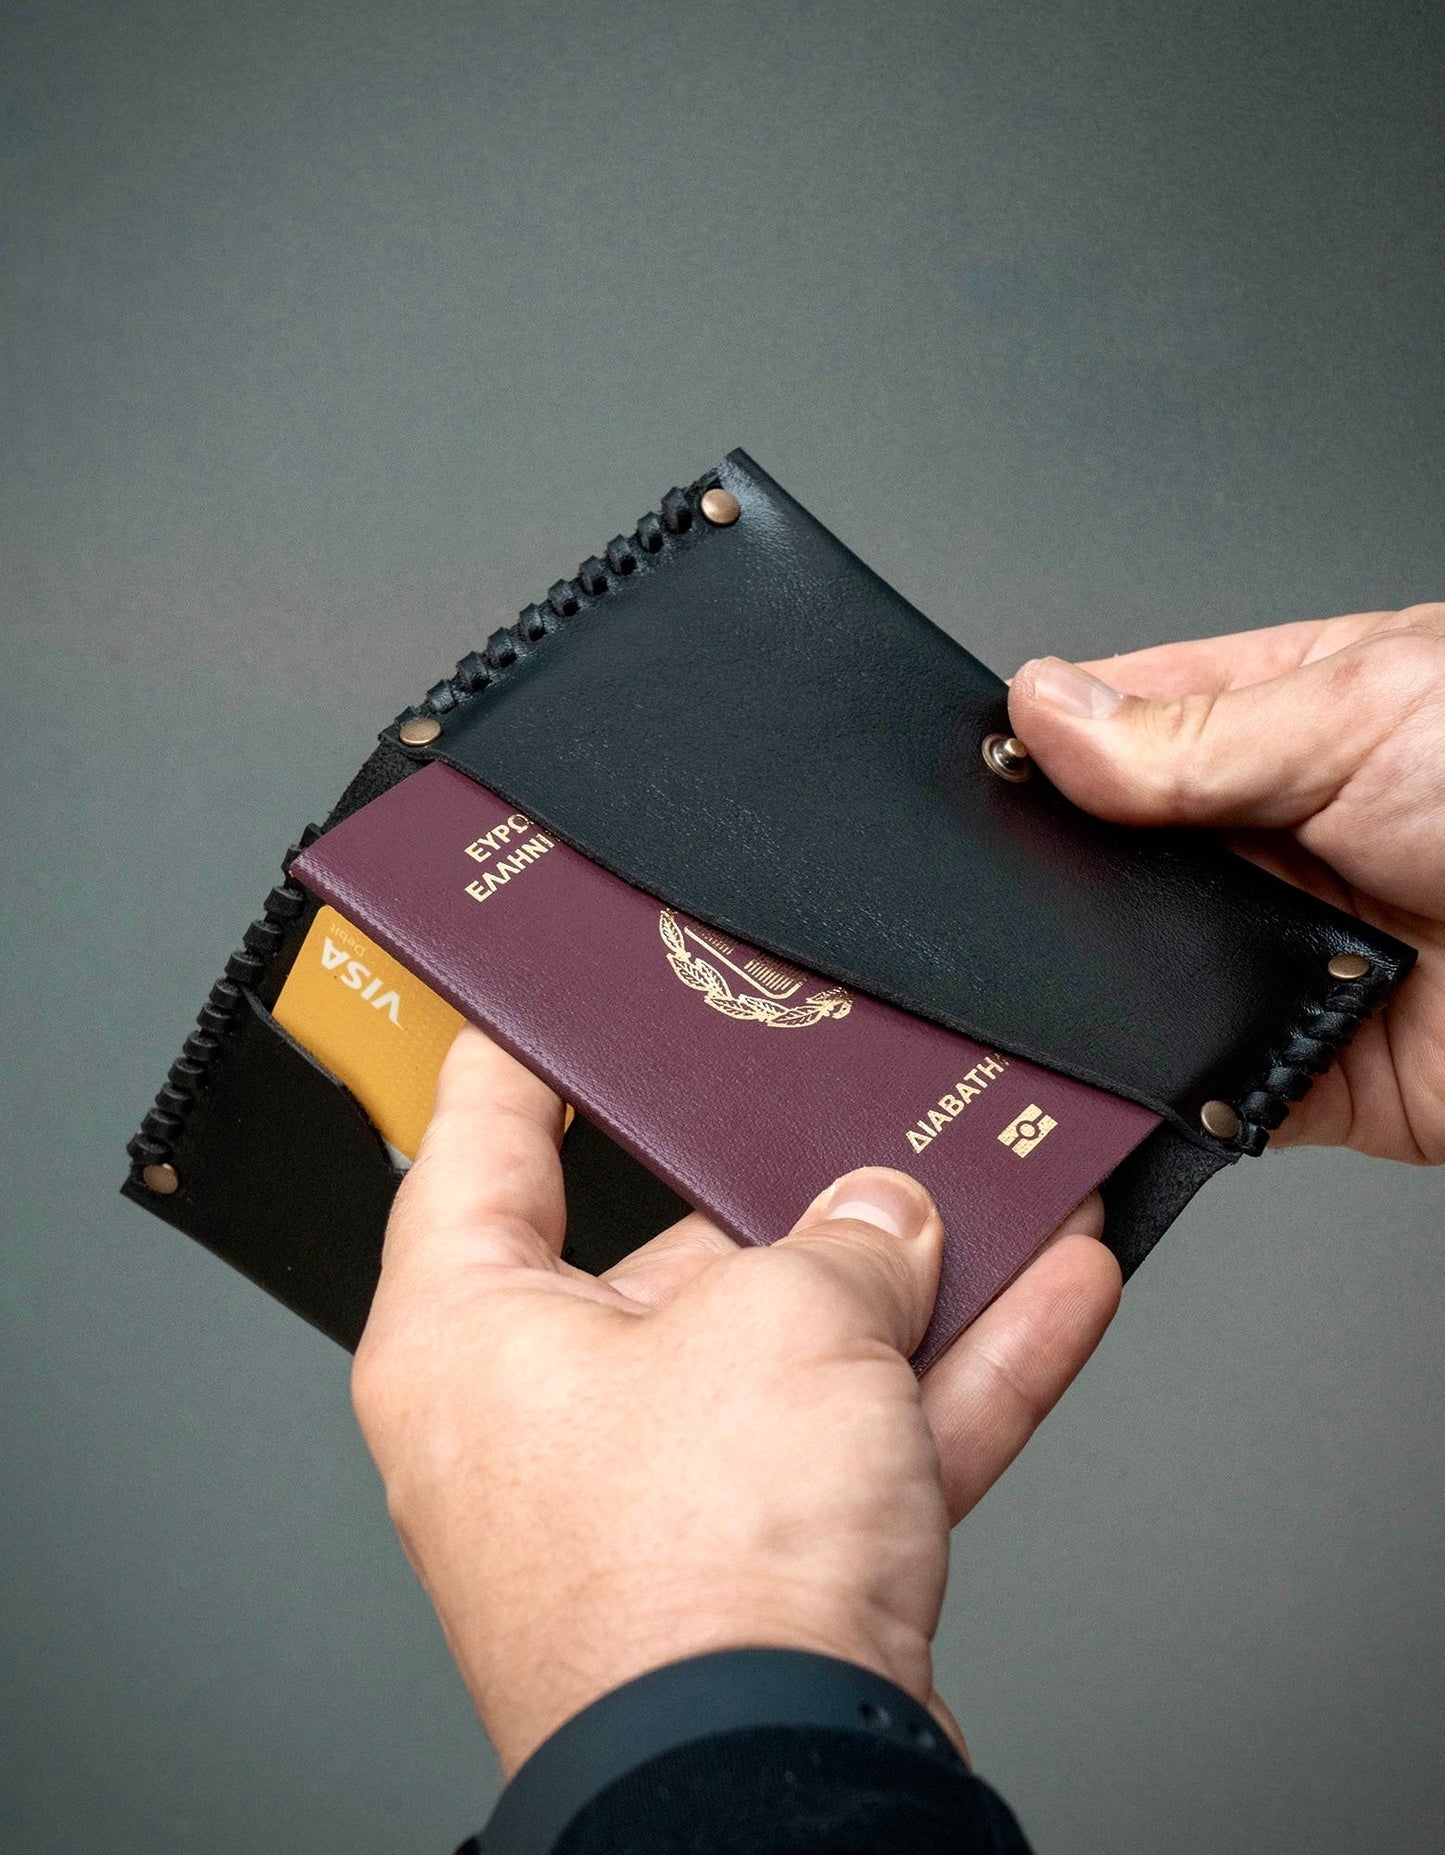 Wallet for Passport, Cards and Banknotes "Travel" - MAKEY EU